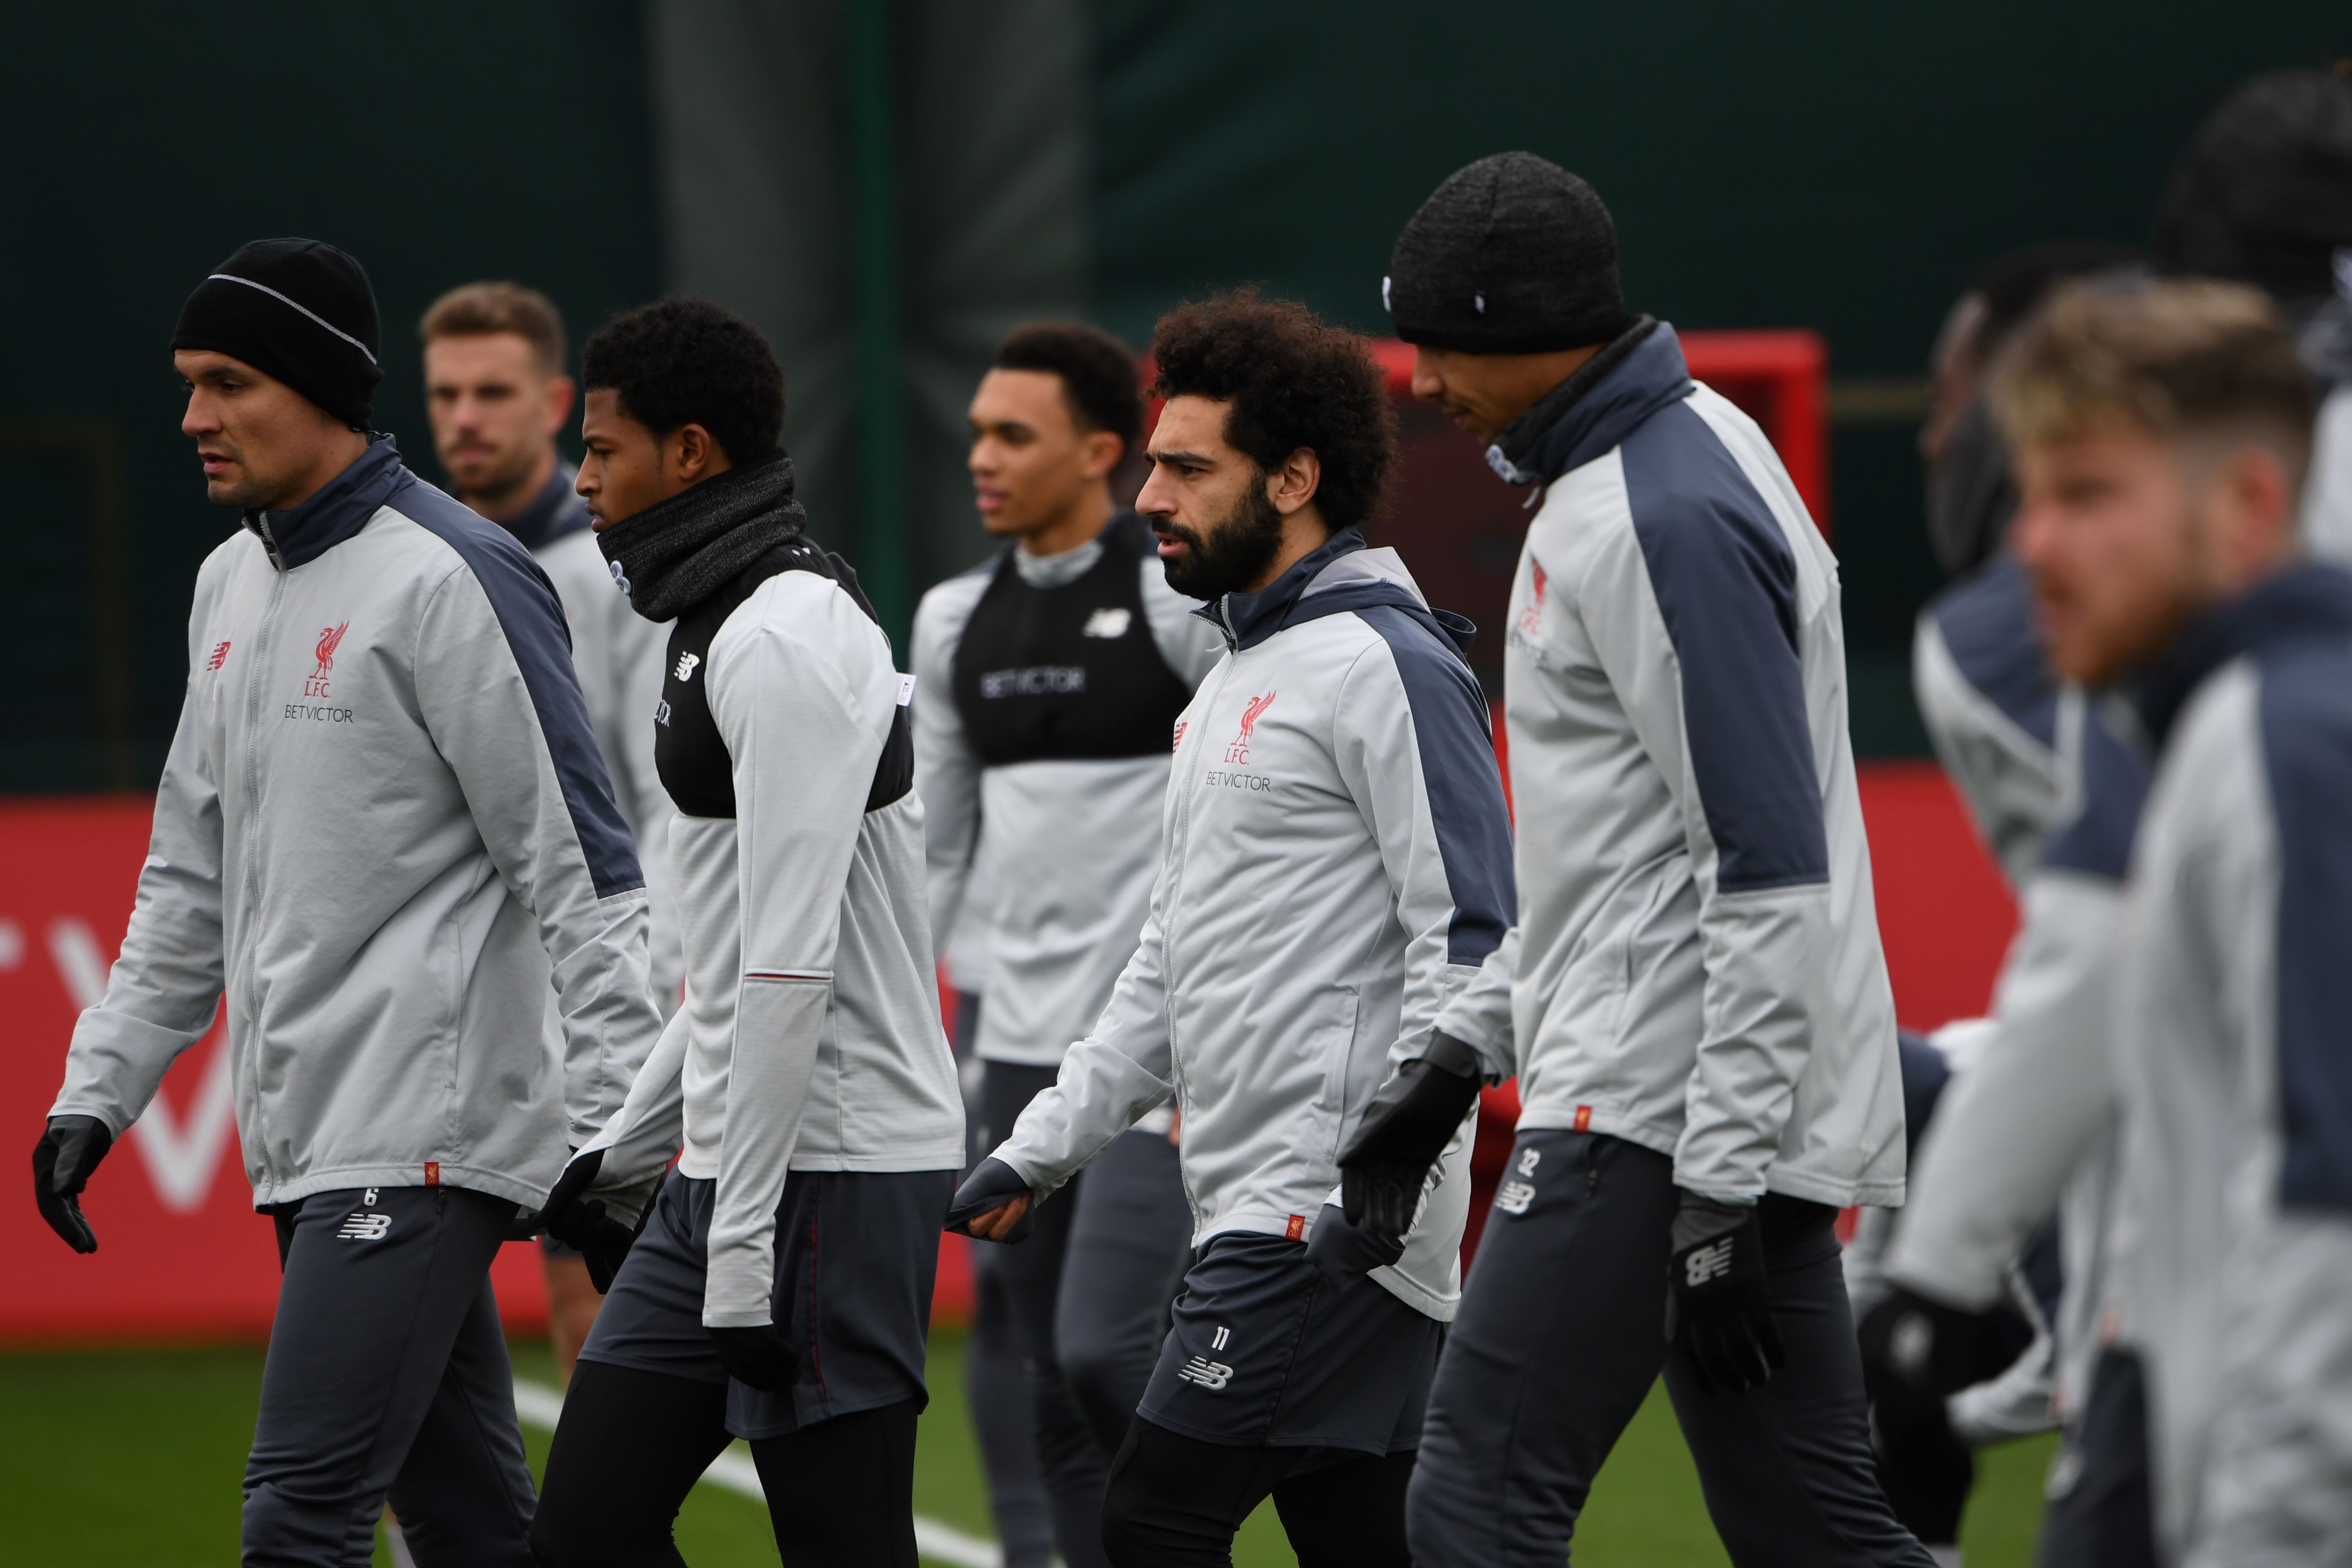 Liverpool's Egyptian midfielder Mohamed Salah (C) joins teammates in a team training session at Melwood in Liverpool, north west England on March 12, 2019, on the eve of their Champions League round of 16, second leg football match against Bayern Munich. (Photo by Paul ELLIS / AFP)        (Photo credit should read PAUL ELLIS/AFP/Getty Images)